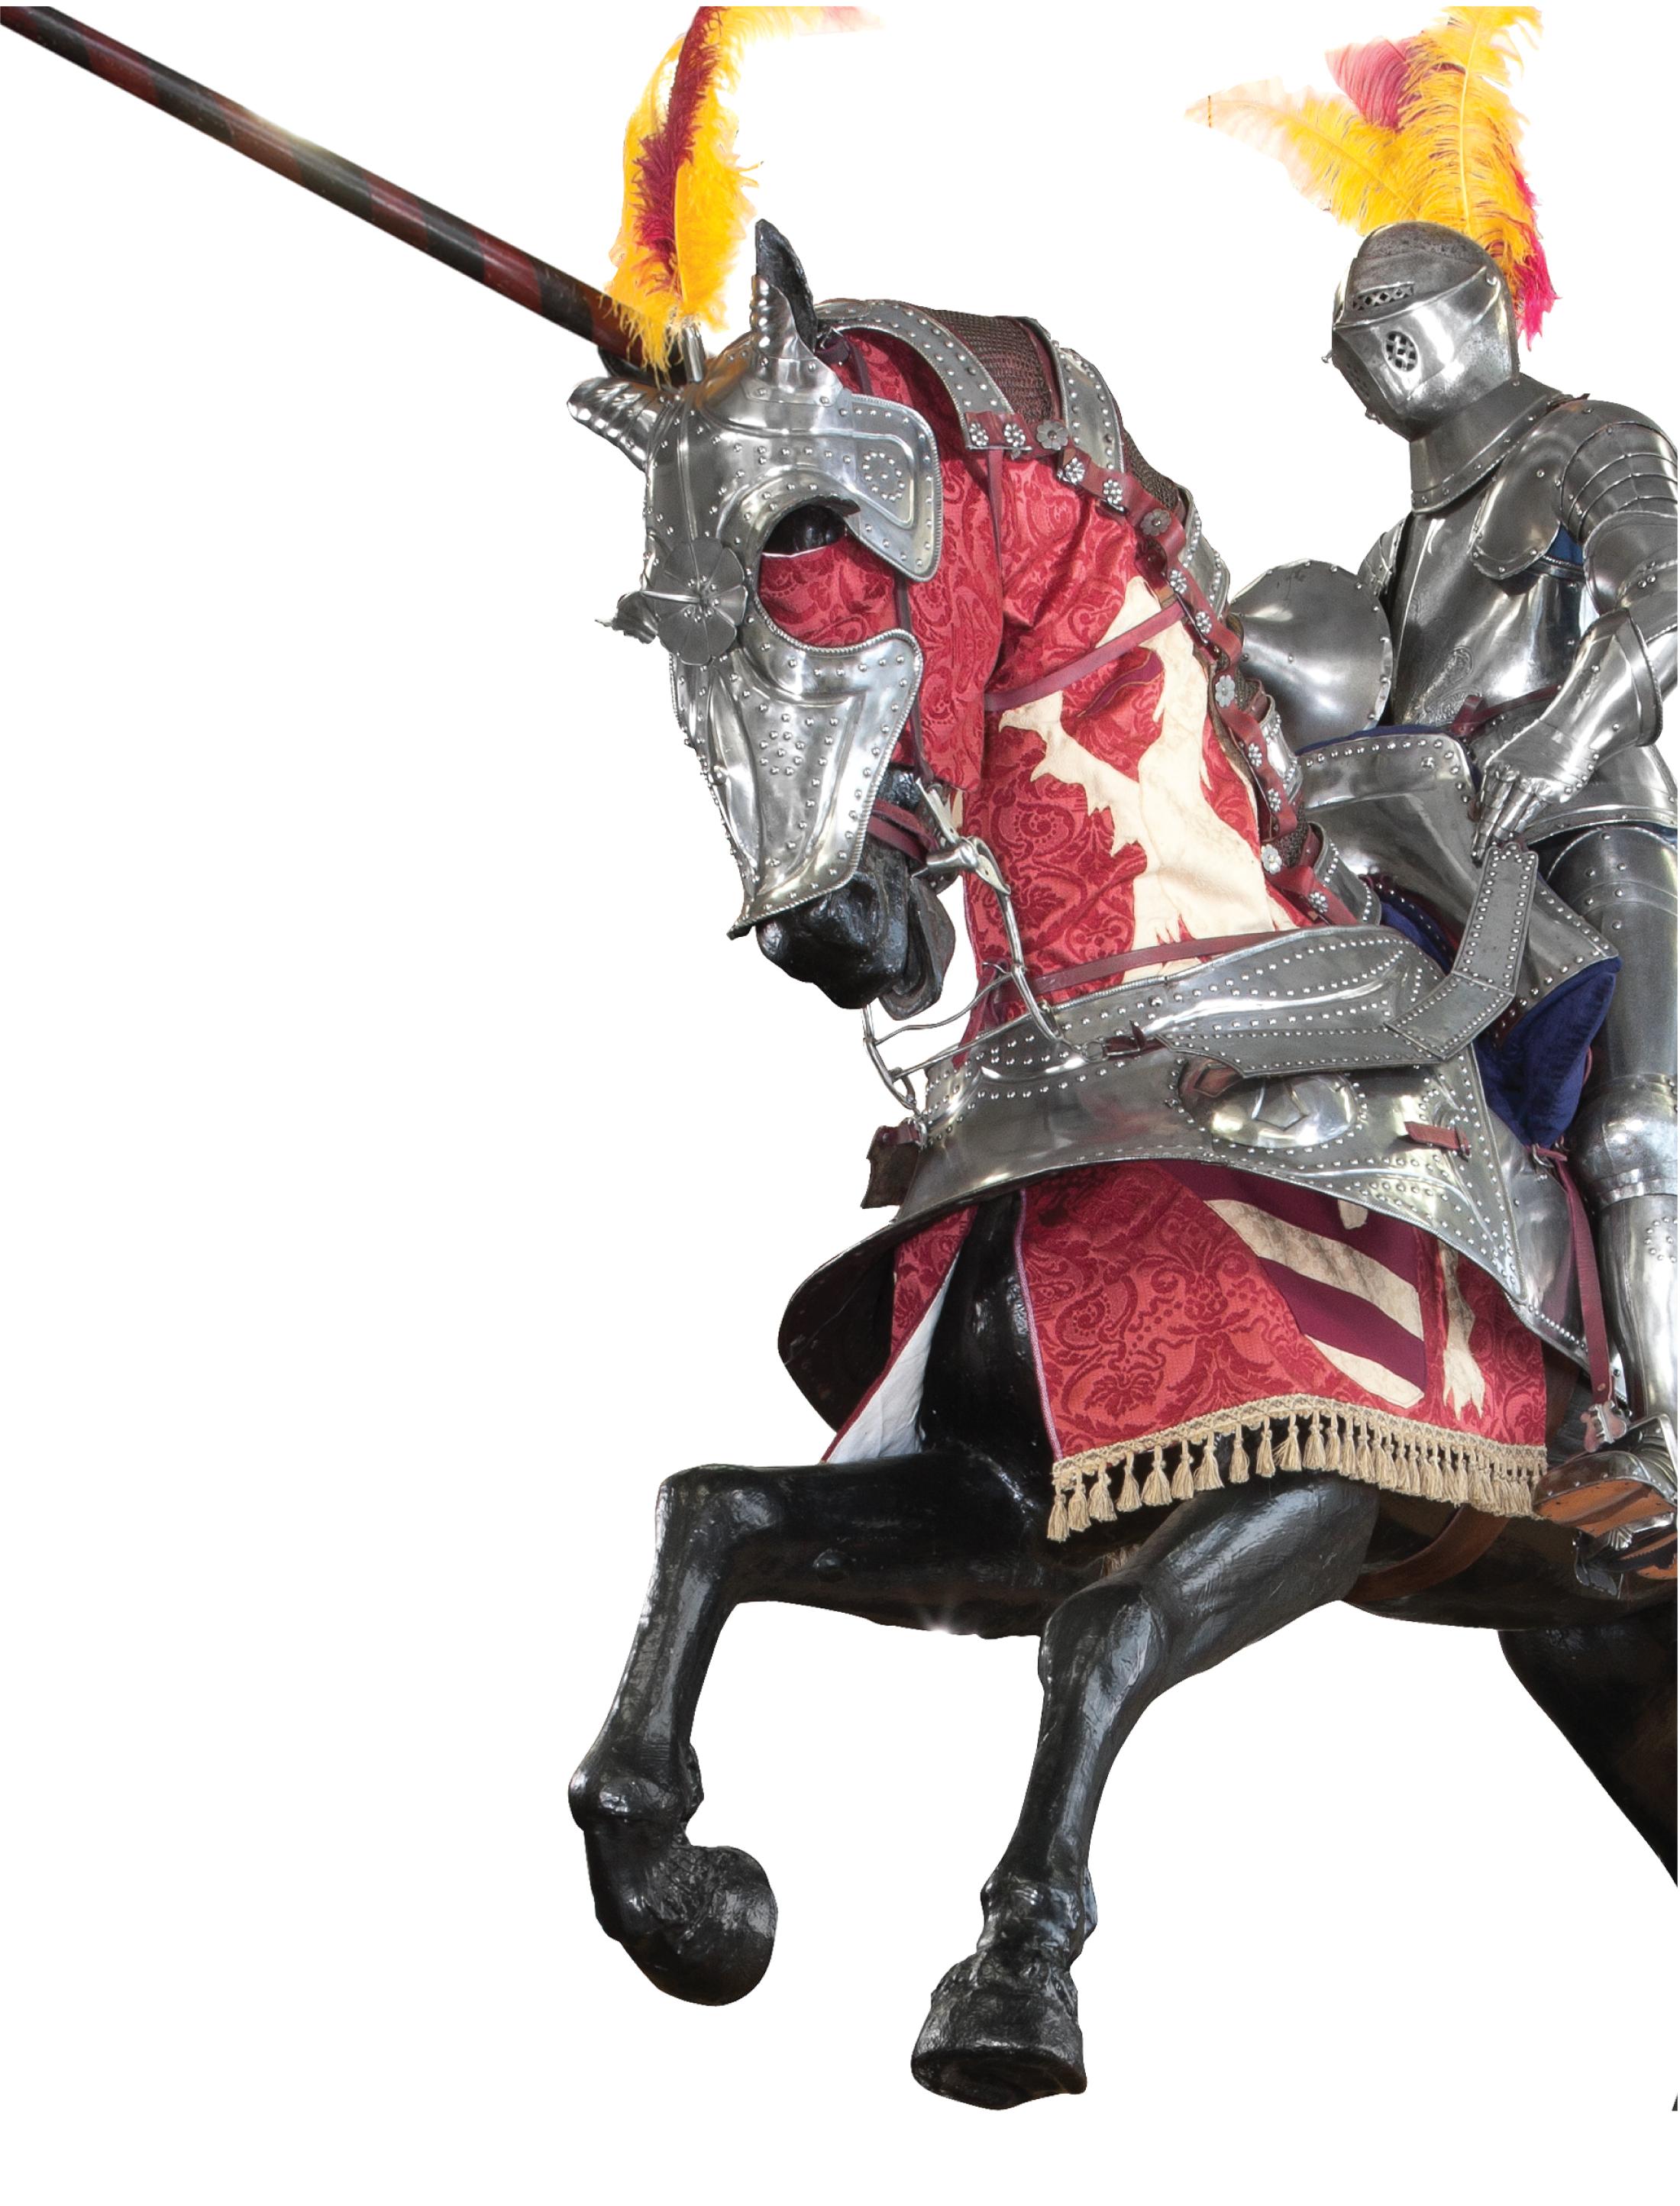 A magnificent armour for man and horse – with the horse bards being formerly exhibited at the Metropolitan Museum of Art in New York. This horse armour is discussed in ‘A Record of European Arms and Armour Through Seven Centuries by Sir Guy Francis